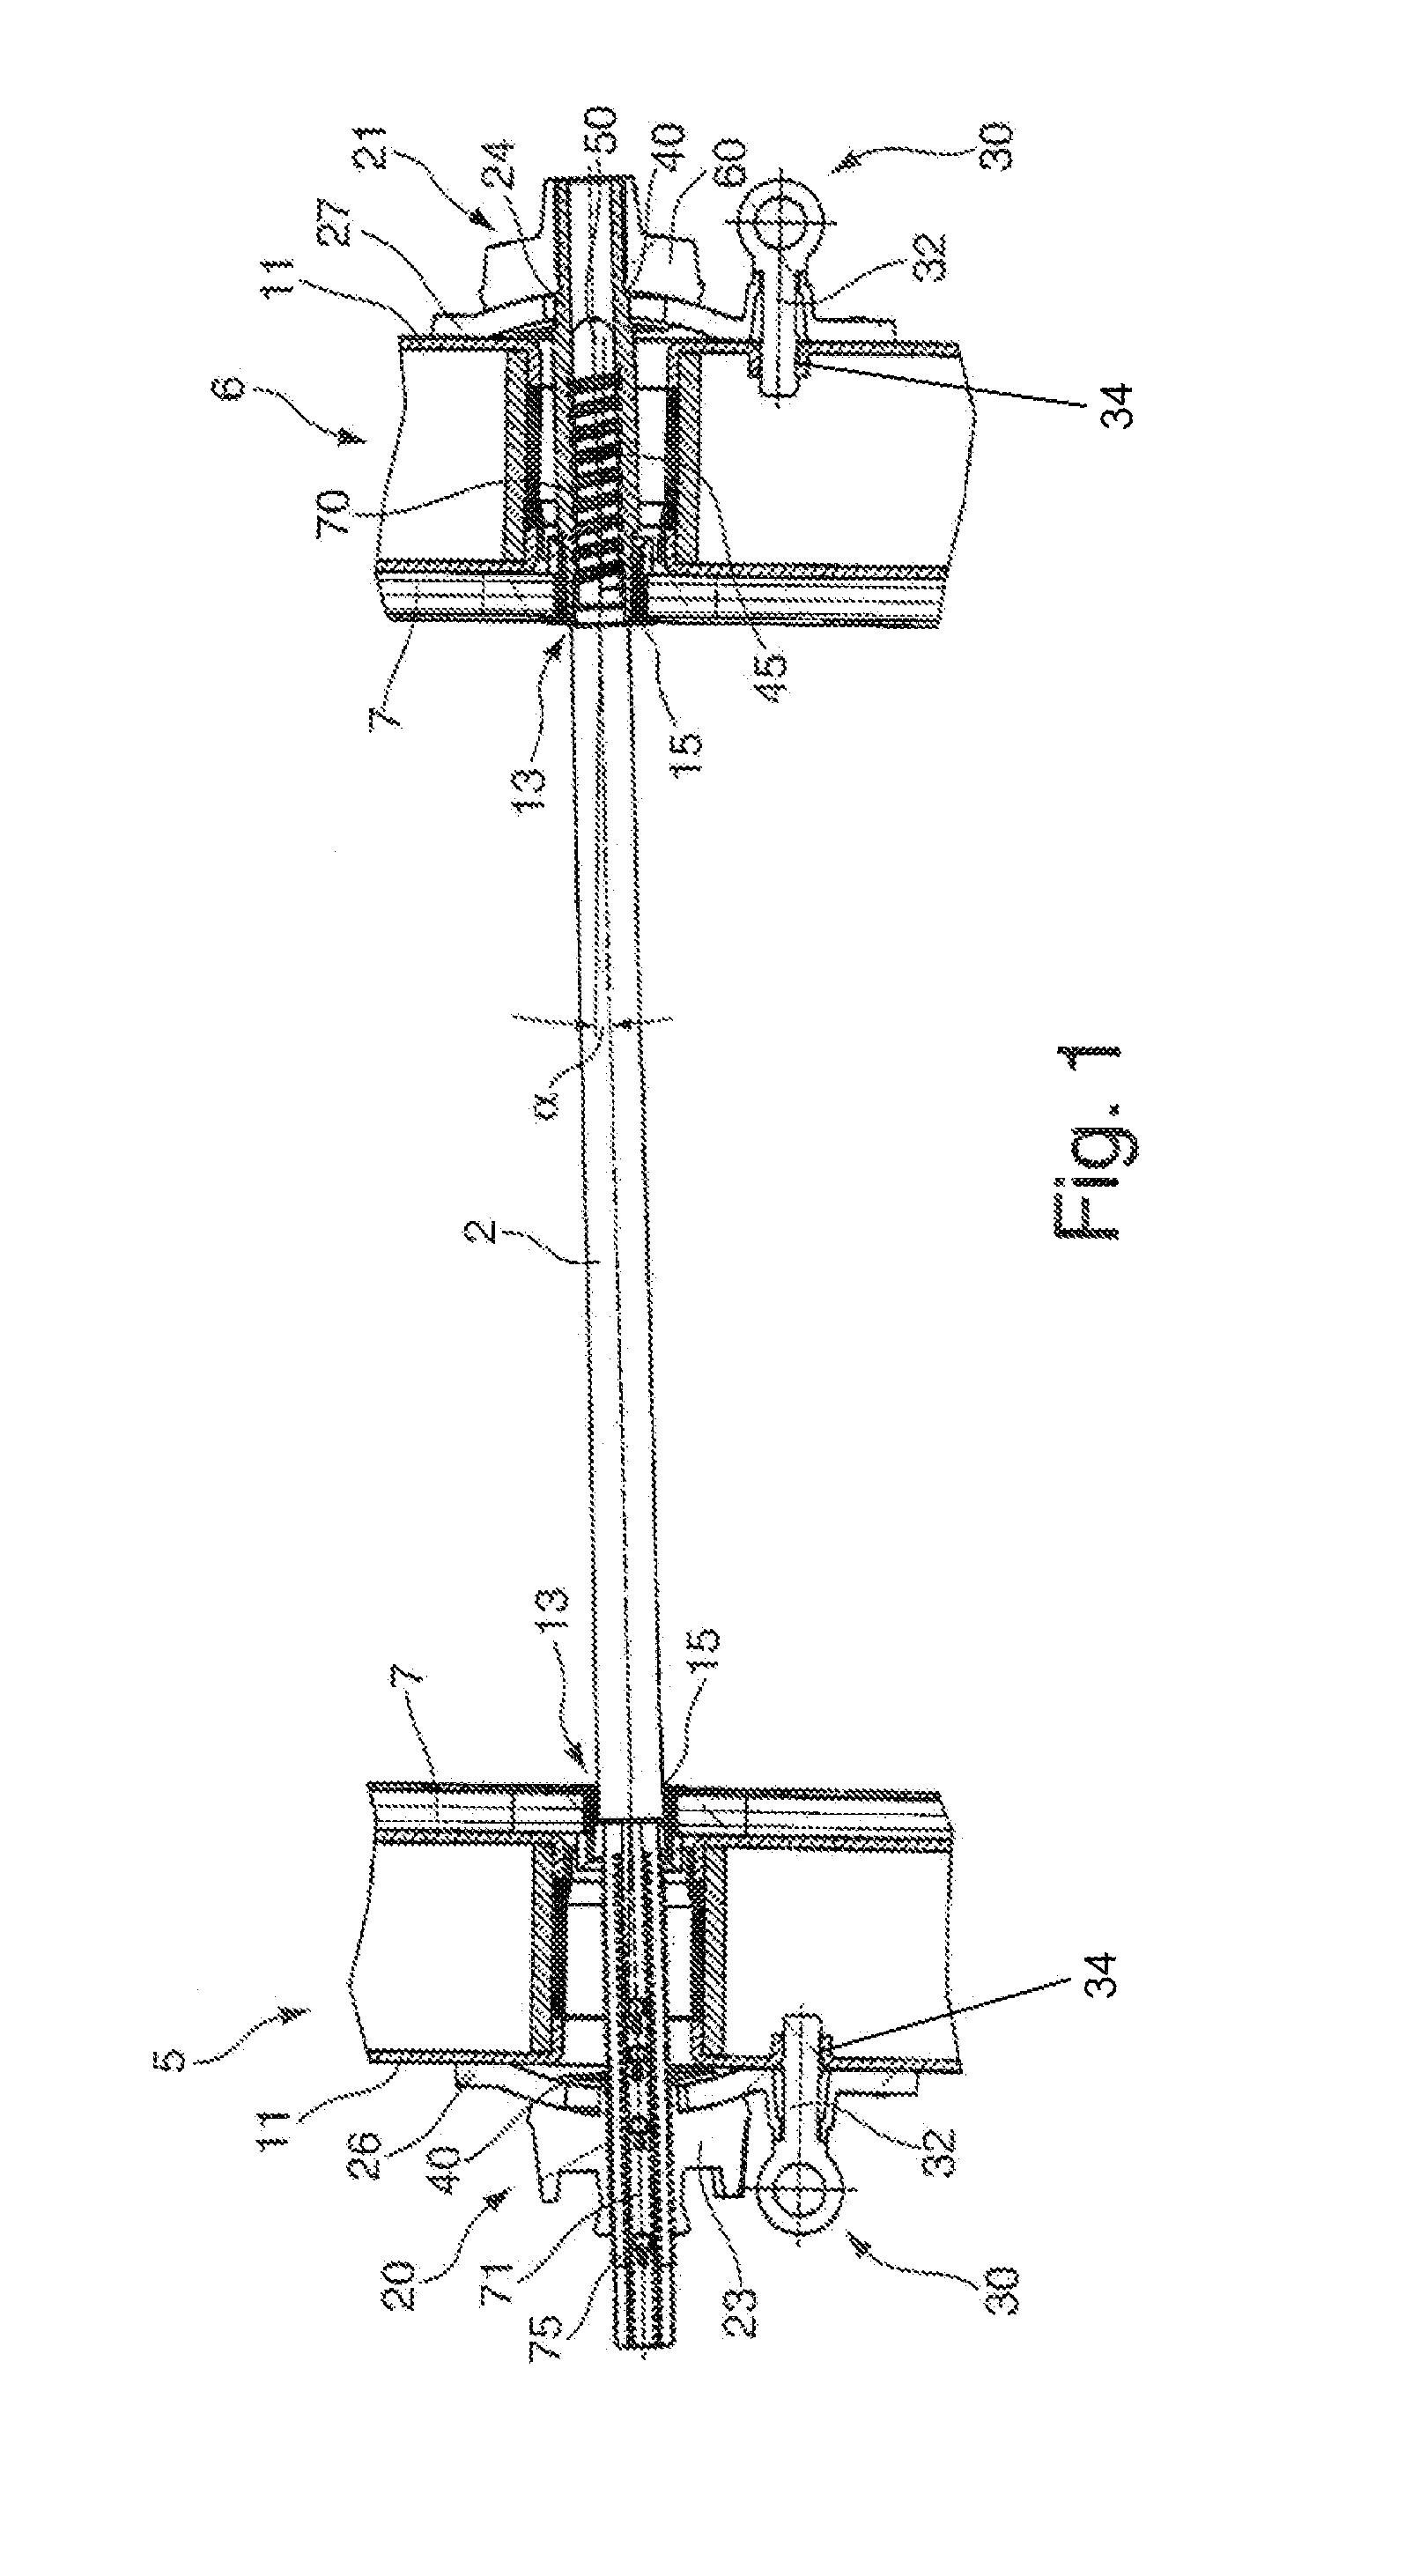 Anchor system of a concrete wall formwork